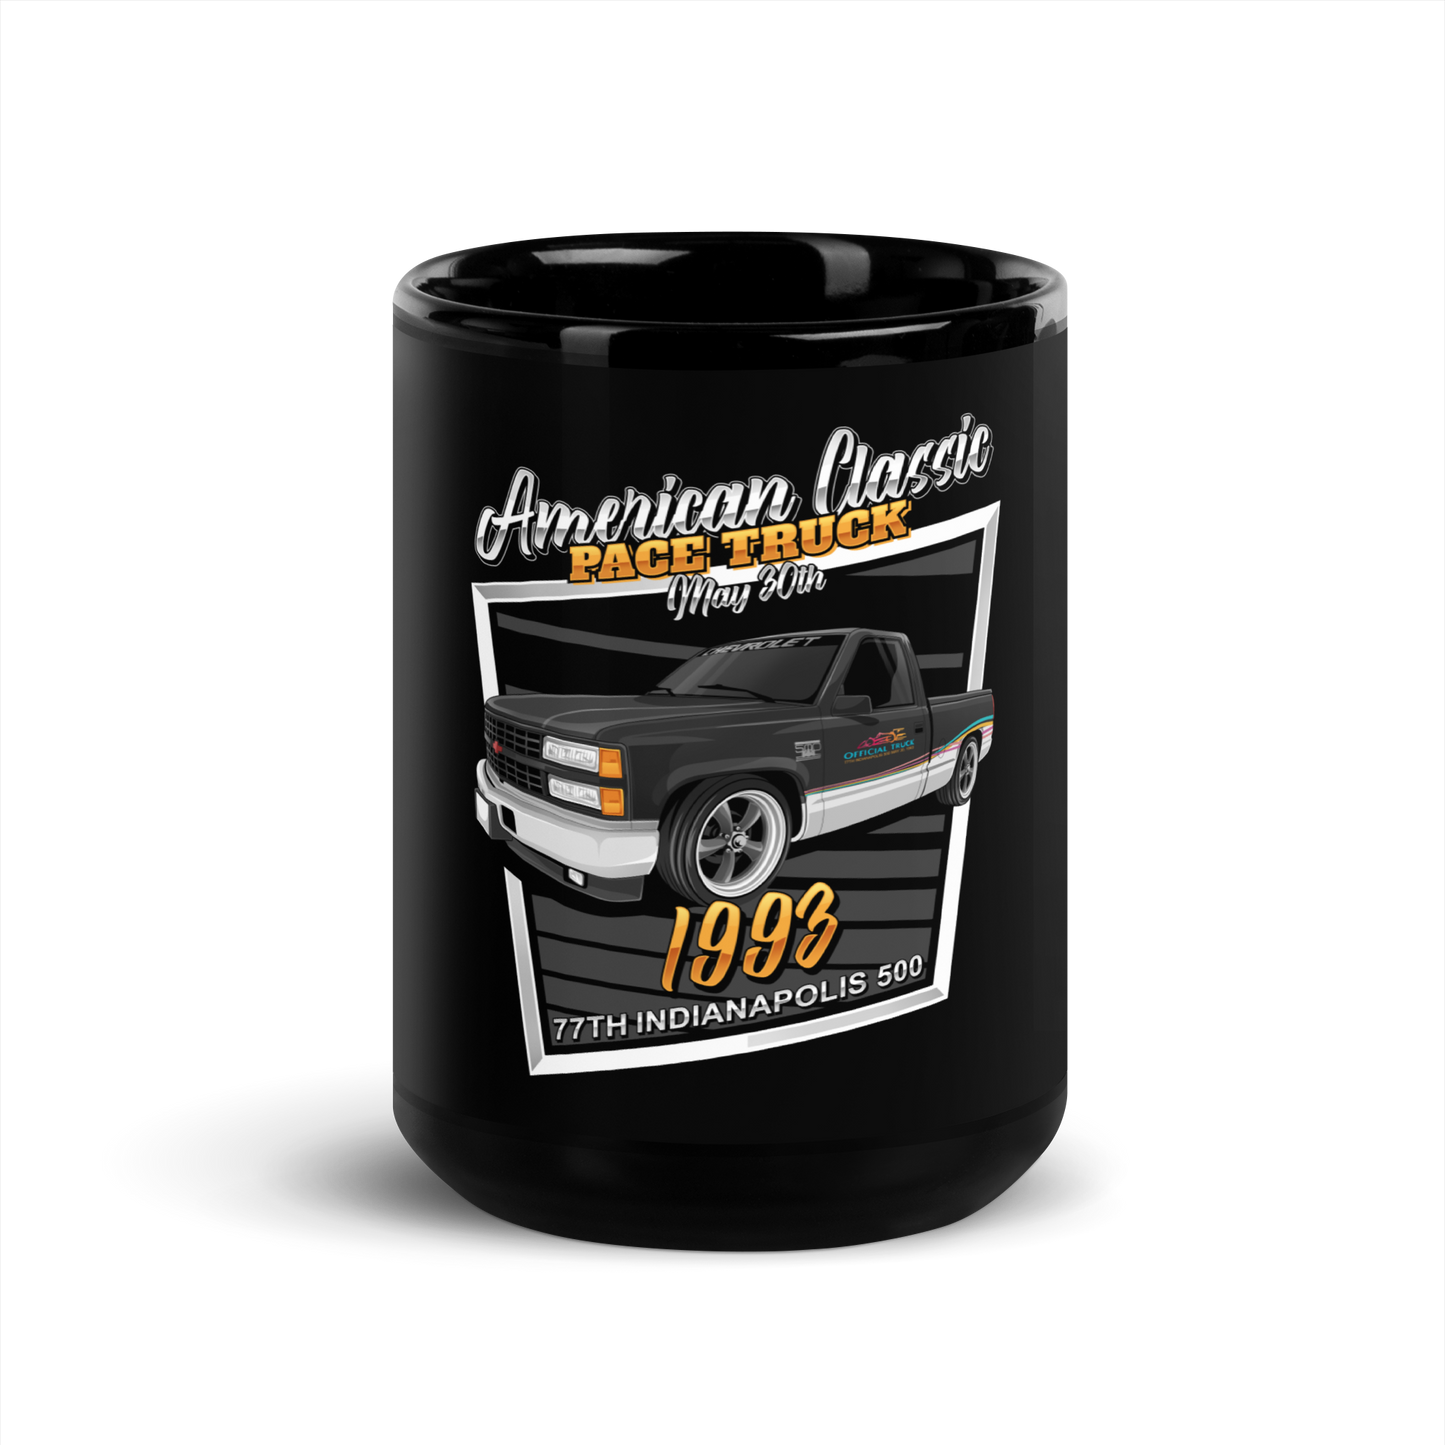 Chevrolet OBS 1993 Indy 500 Pace Truck Black Glossy Mug